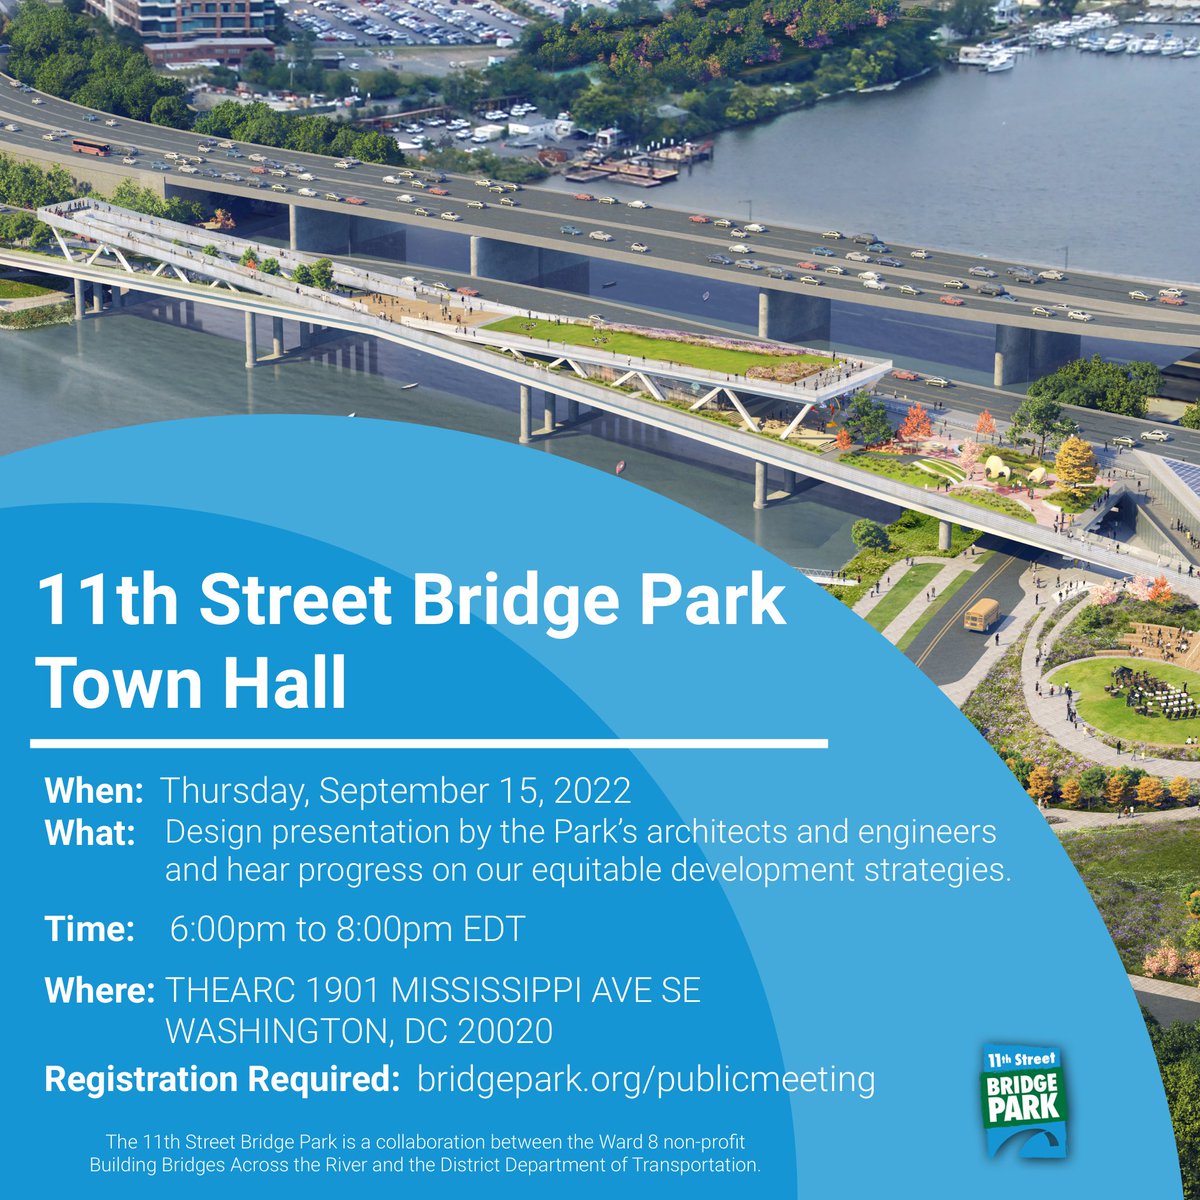 ICYMI: There is still time to RSVP for today's, 9/15 Town Hall meeting! Join us at 6:00pm EST to meet our community partners, hear from the 11th Street Bridge Park Team, learn about our latest updates, and more! RSVP: ow.ly/Mn1q50KKIsu #DCBridgePark #townhall #community